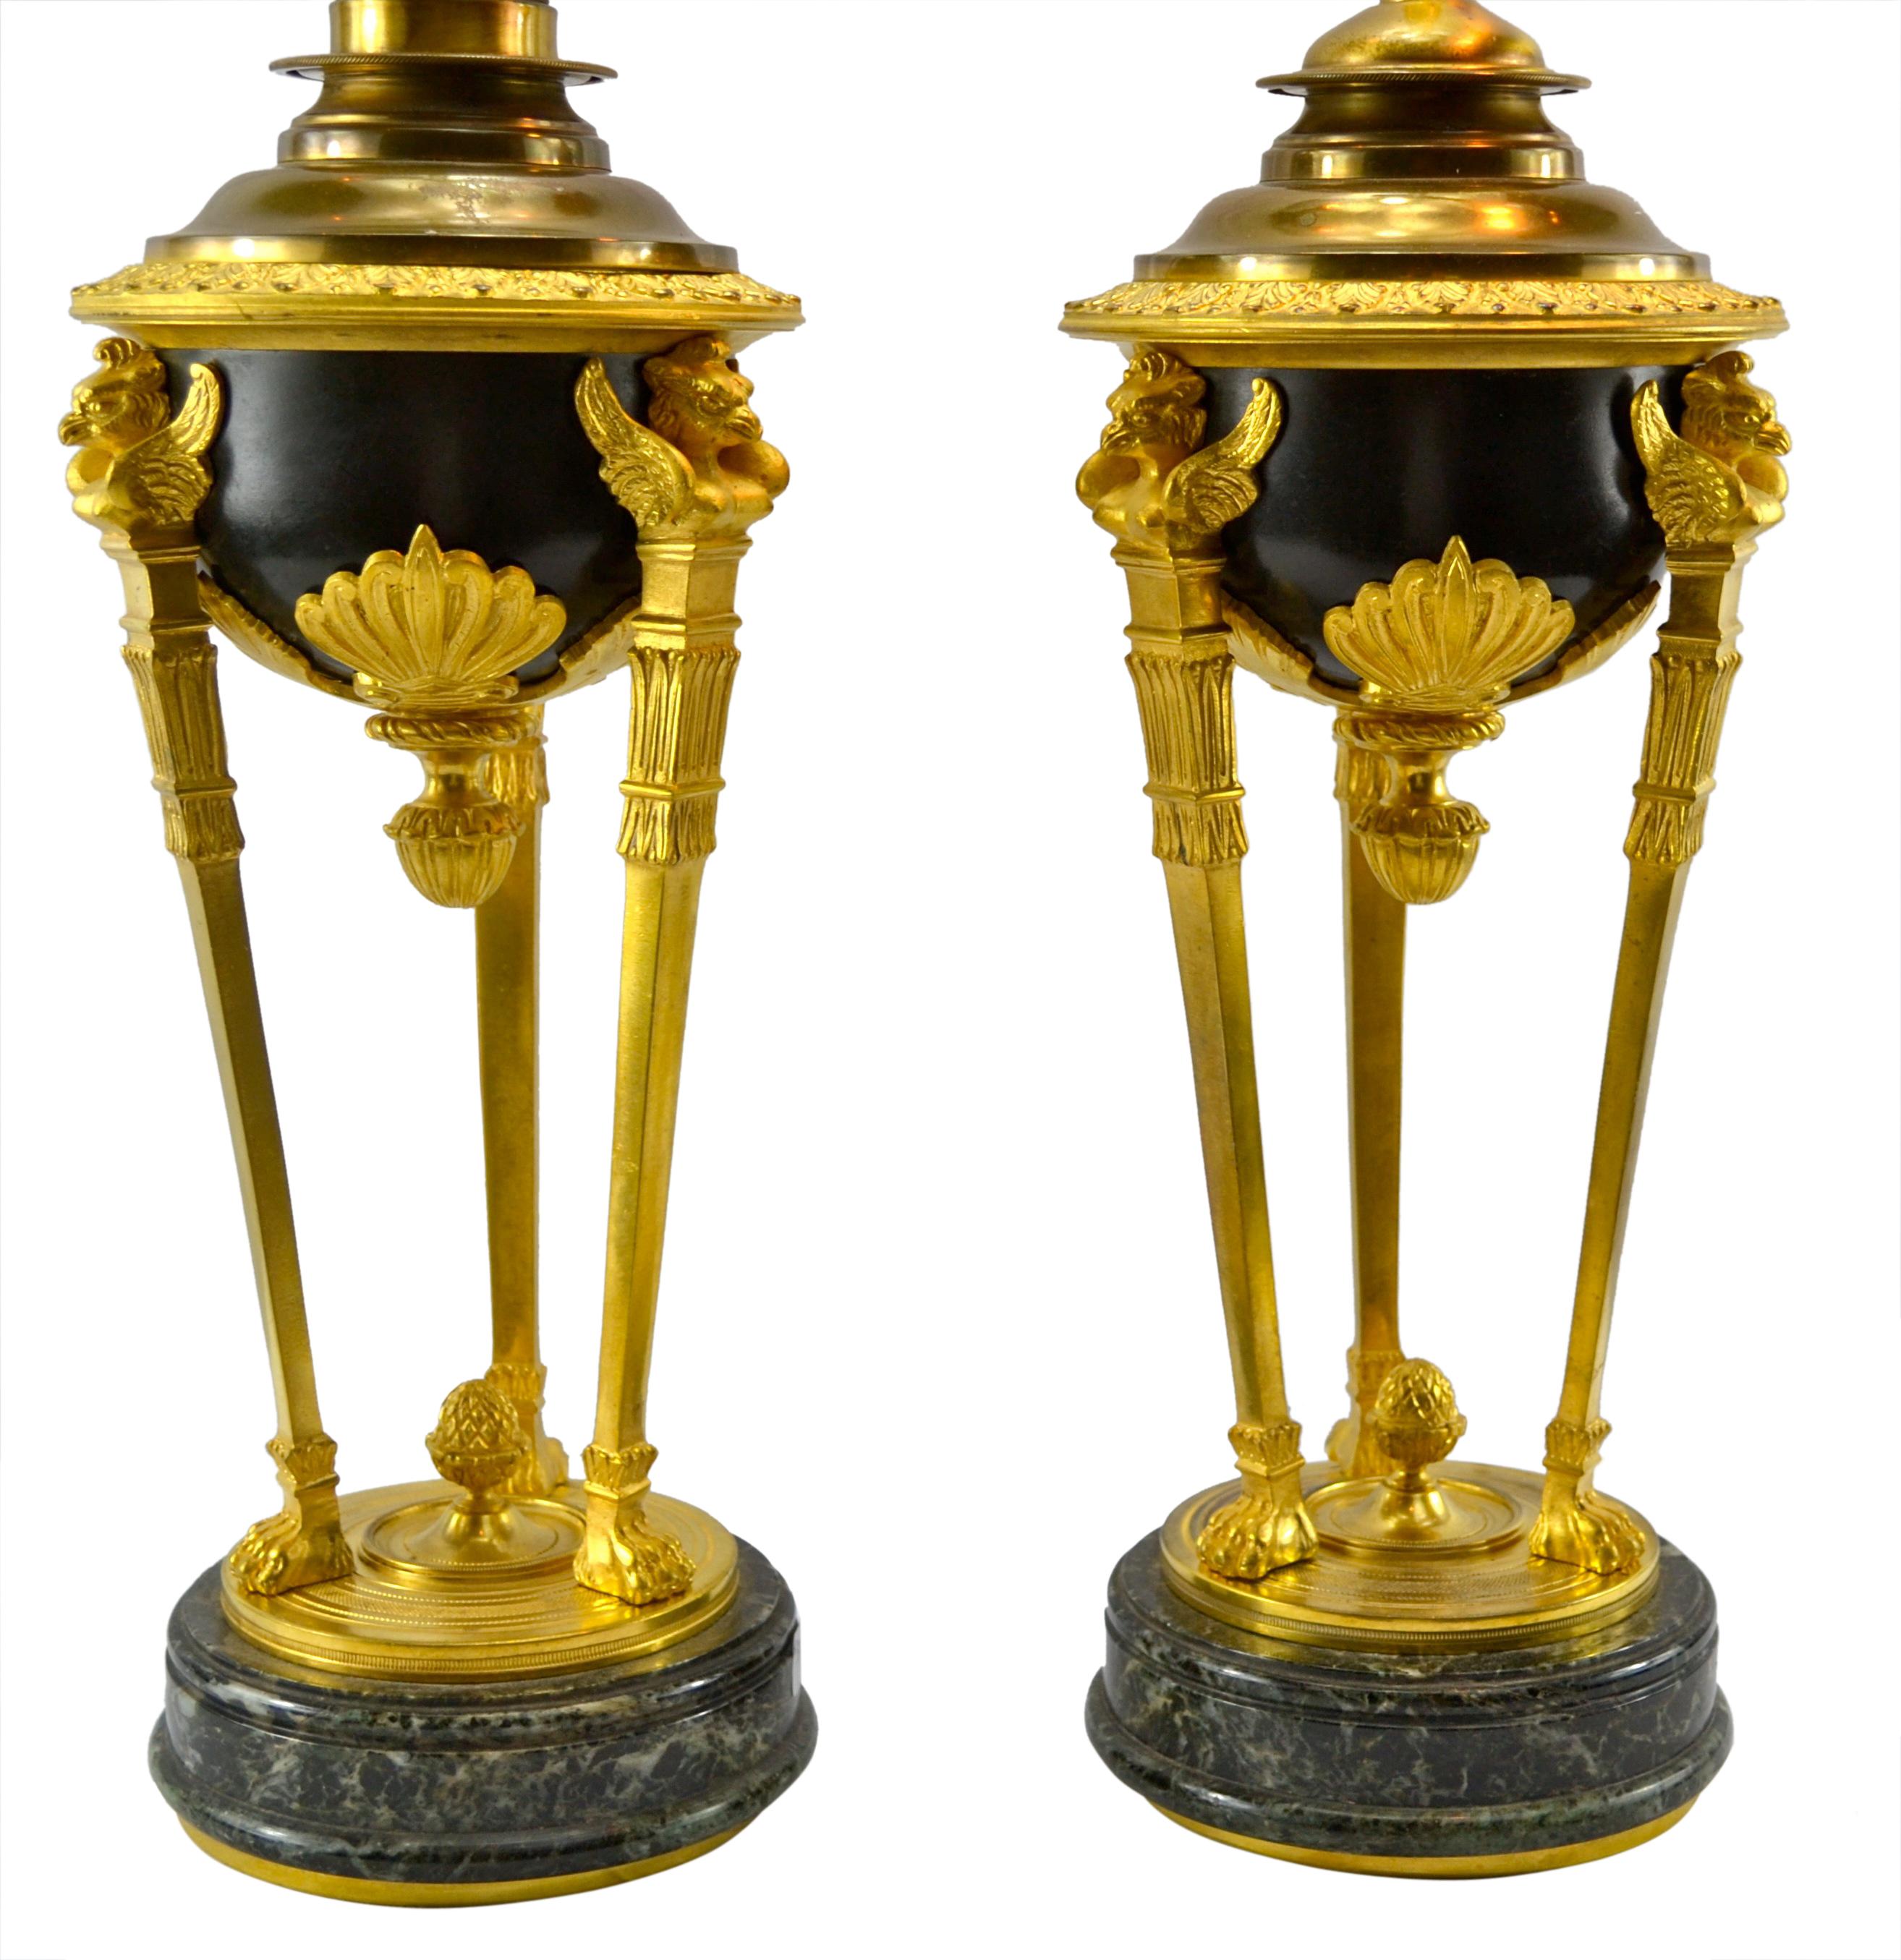 A pair of Pompeian Empire style oil lamp shaped lamps in gilded and patinated bronze on round marble bases. The lamps feature a cassolette sbody supported by three gilded columns topped with a winged eagle and ending in lion’s paw feet on a further